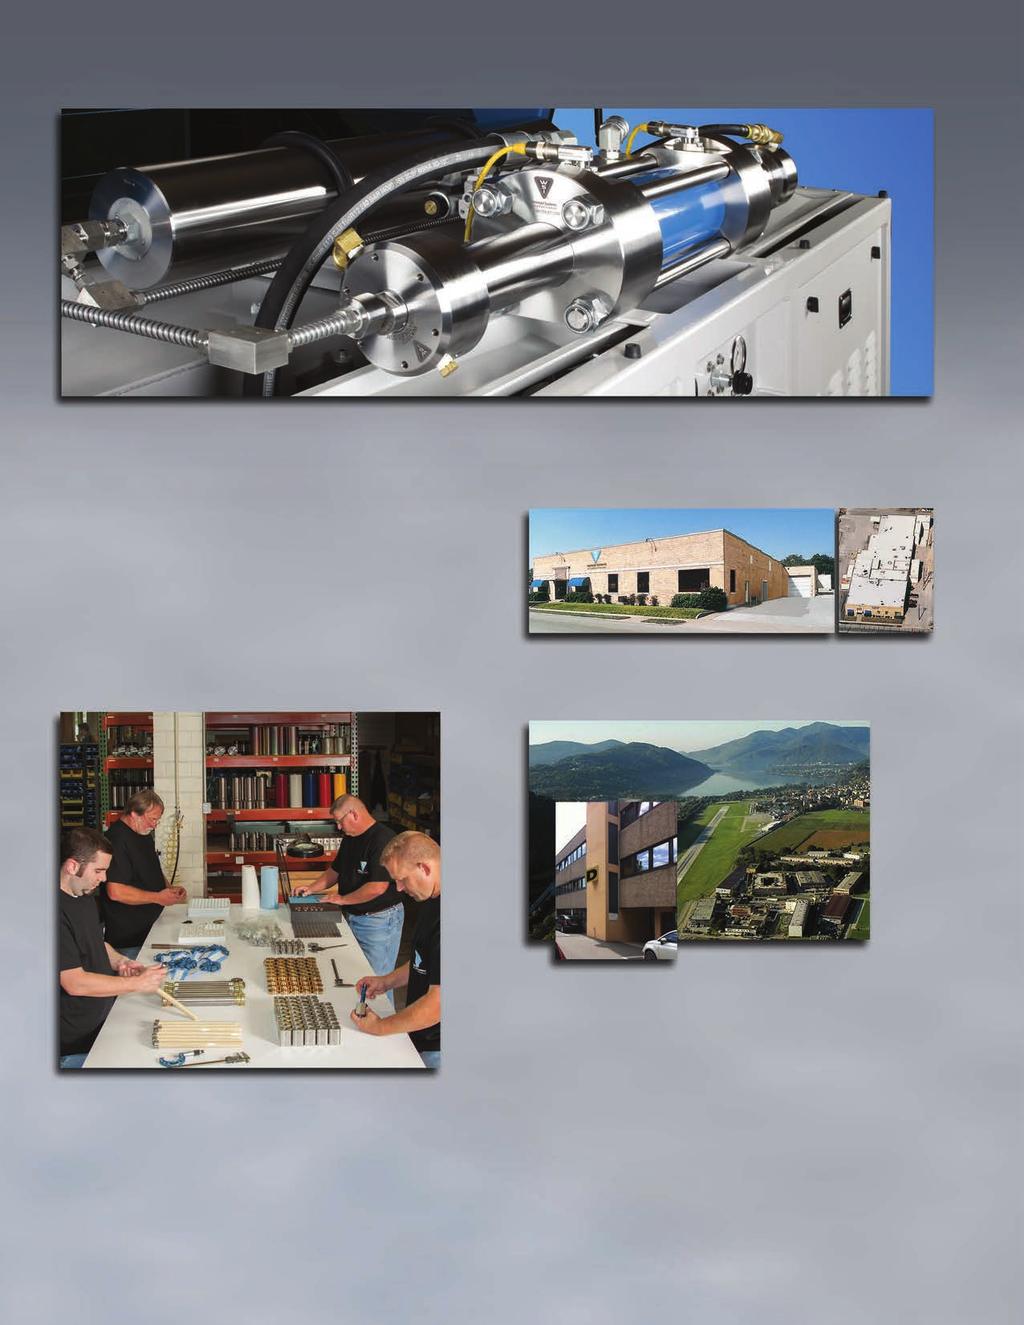 Built on more than 25 years of experience and cutting-edge research and development, all WSI Waterjet Systems International products are made in America, and built to deliver proprietary technology